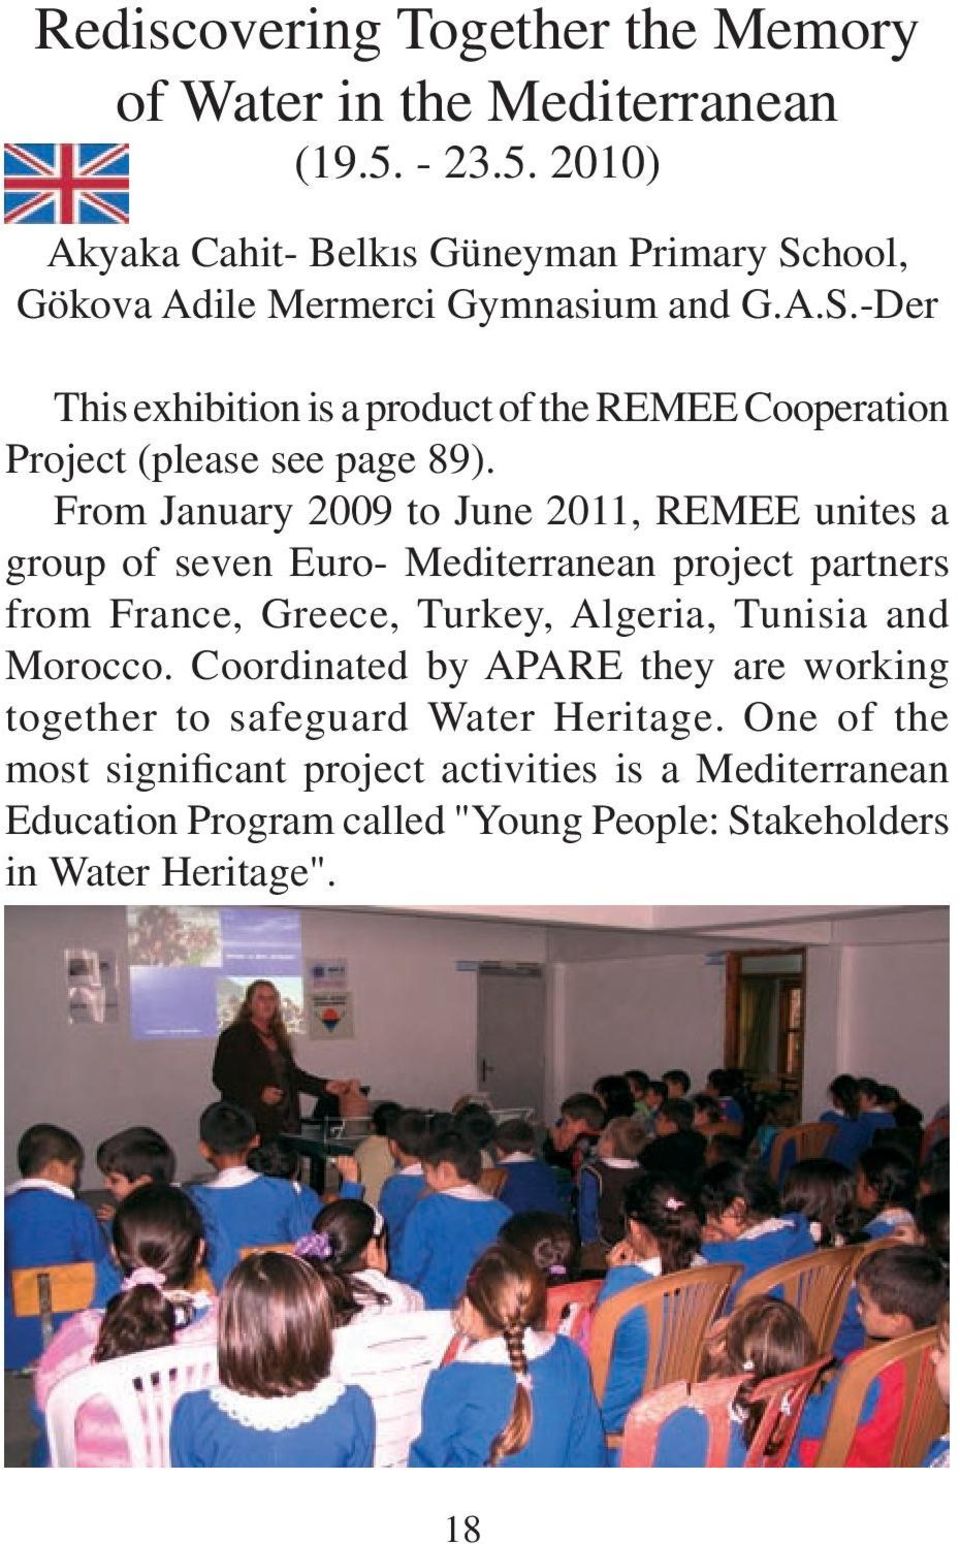 From January 2009 to June 2011, REMEE unites a group of seven Euro- Mediterranean project partners from France, Greece, Turkey, Algeria, Tunisia and Morocco.